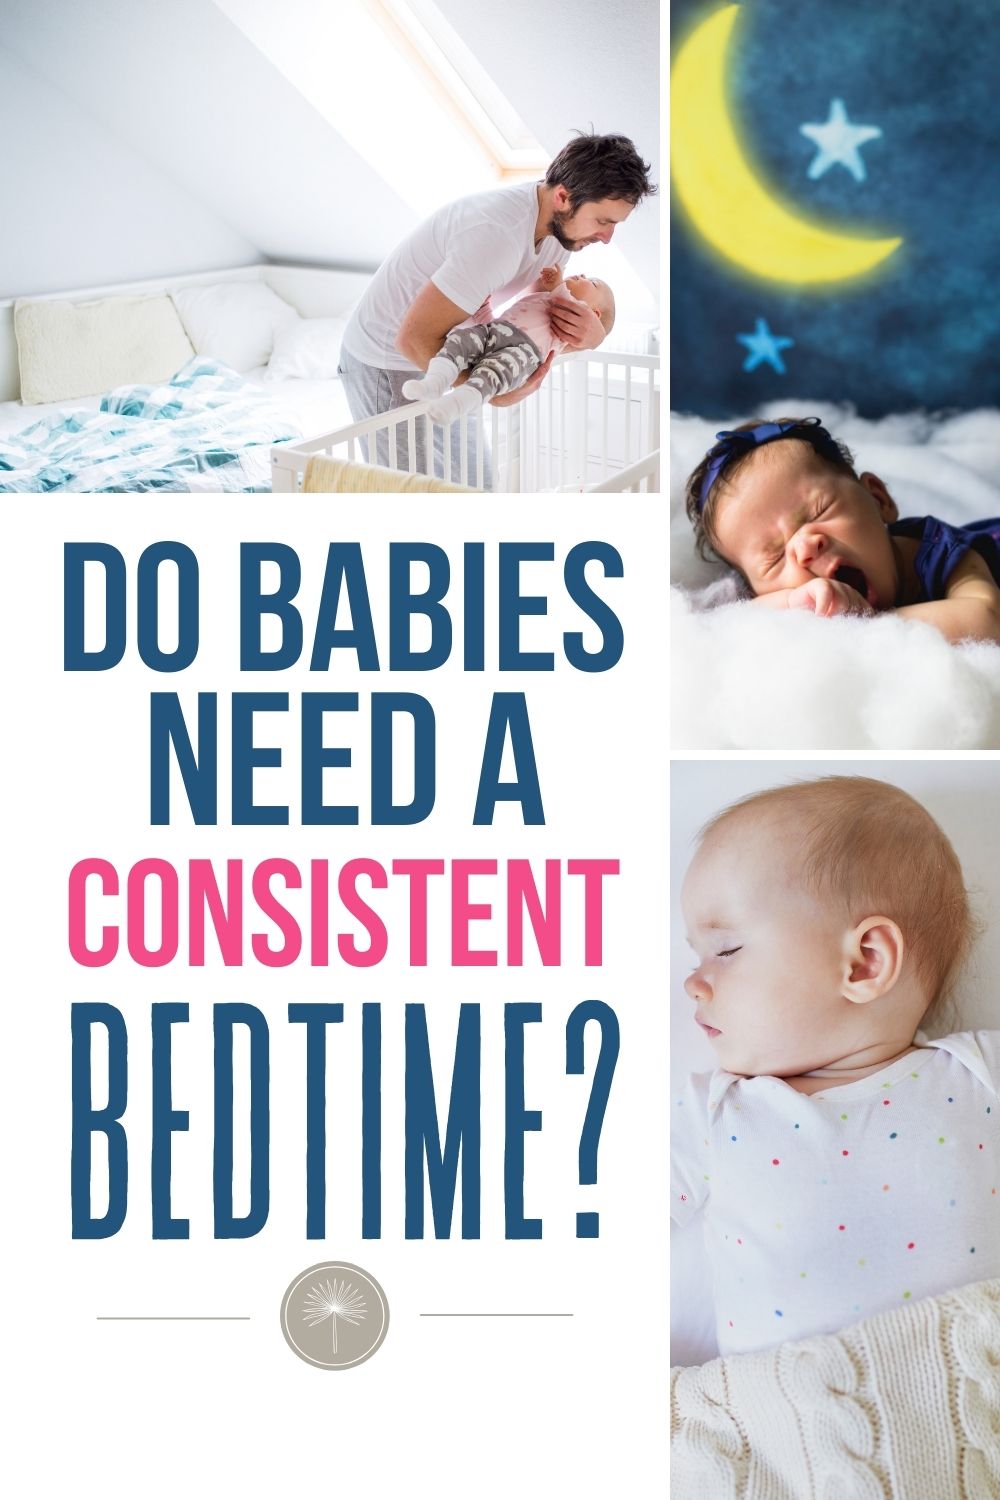 do babies need consistent bedtime pinnable image